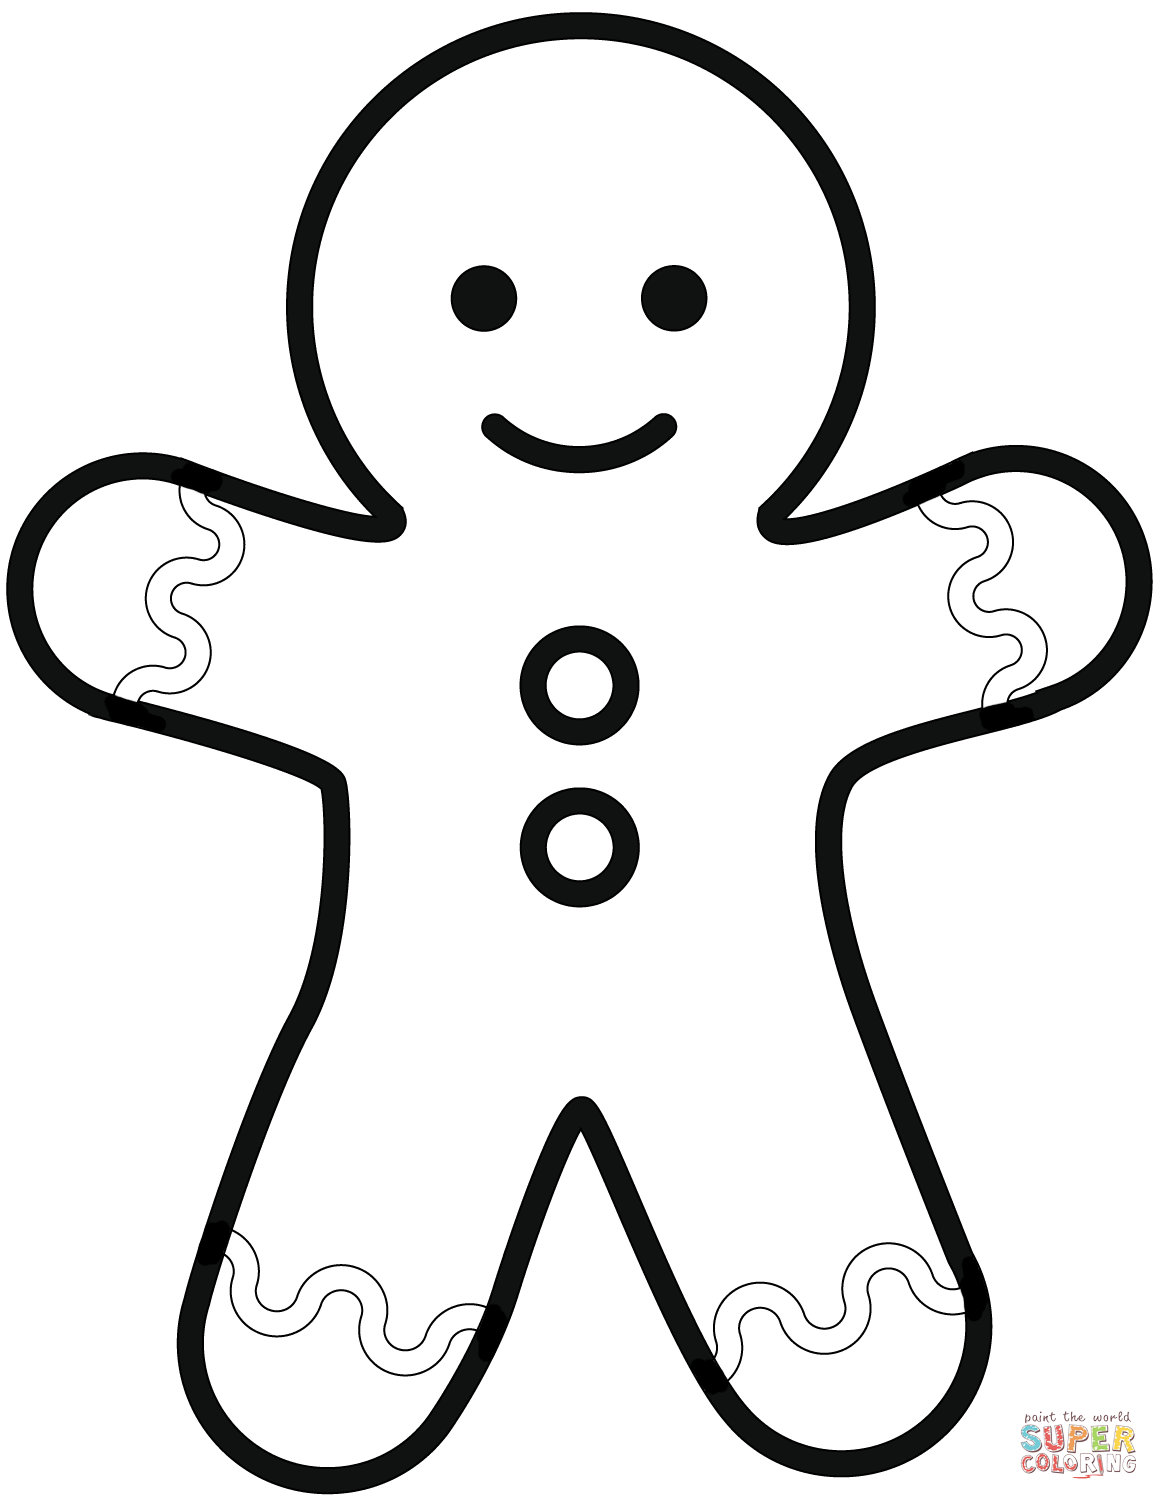 Simple Gingerbread Man coloring page | Free Printable Coloring Pages | Gingerbread  man coloring page, Christmas coloring pages, Christmas art